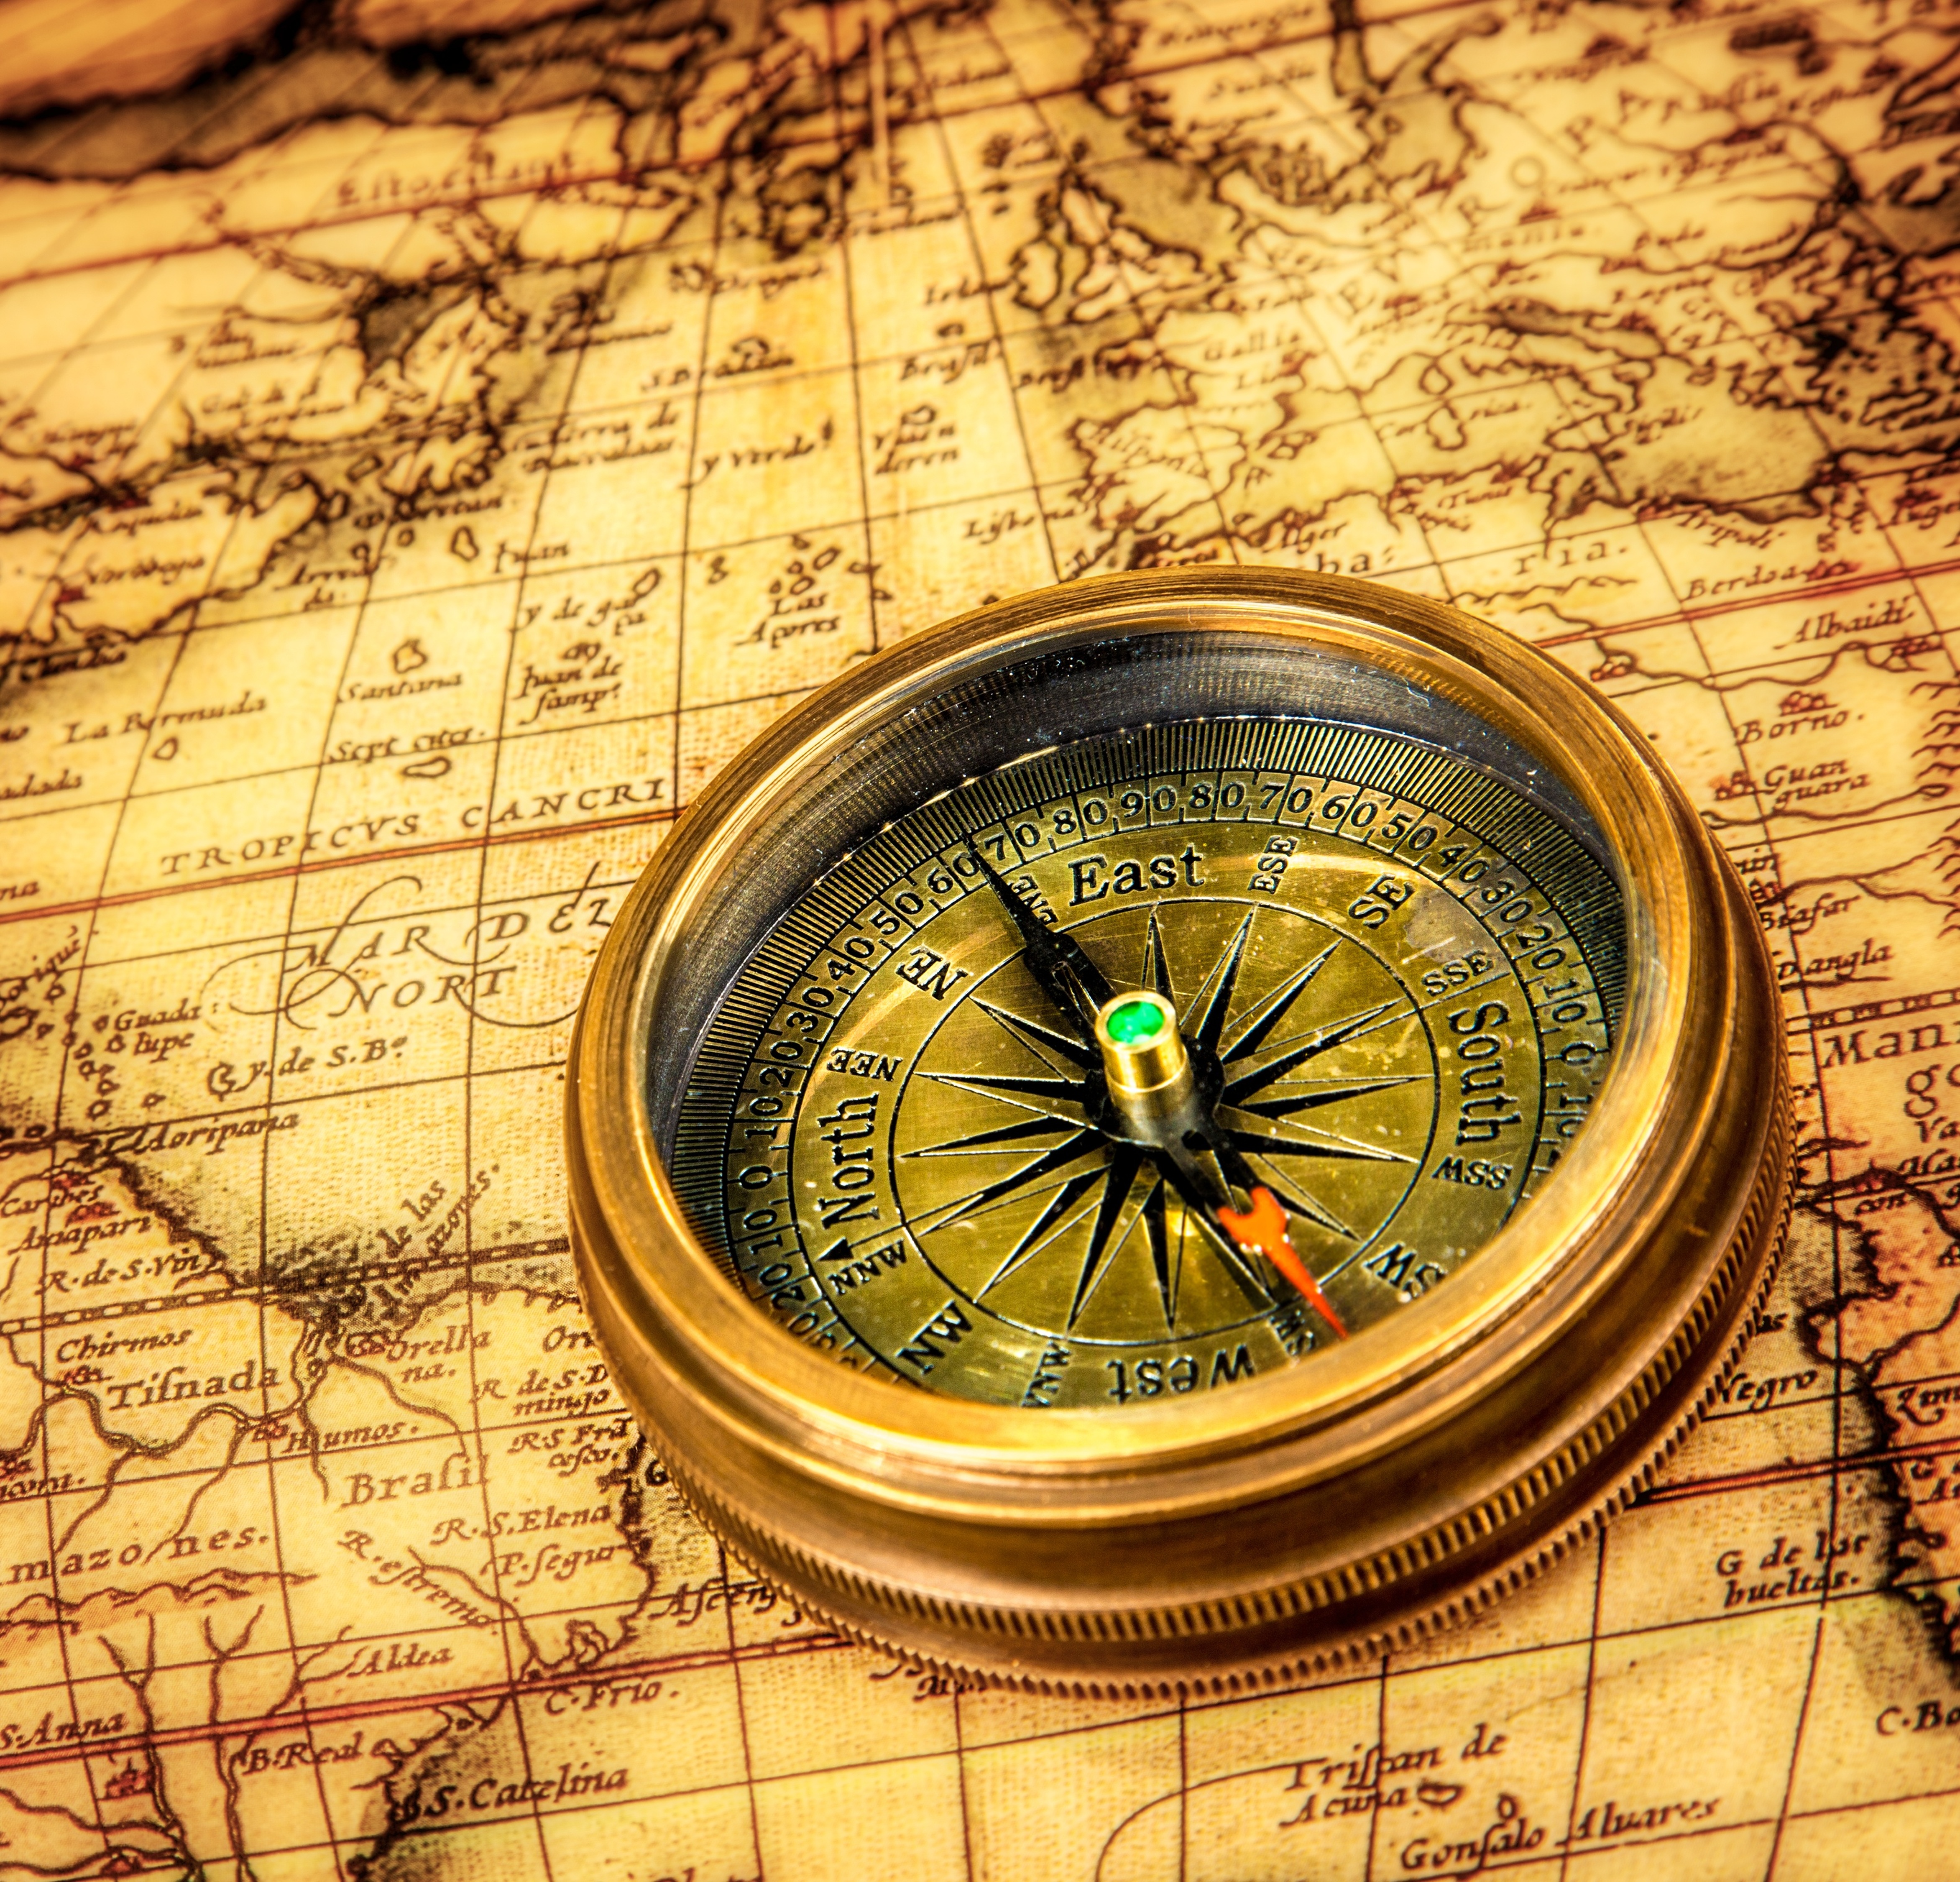 18731117 – vintage still life. vintage compass lies on an ancient world map.